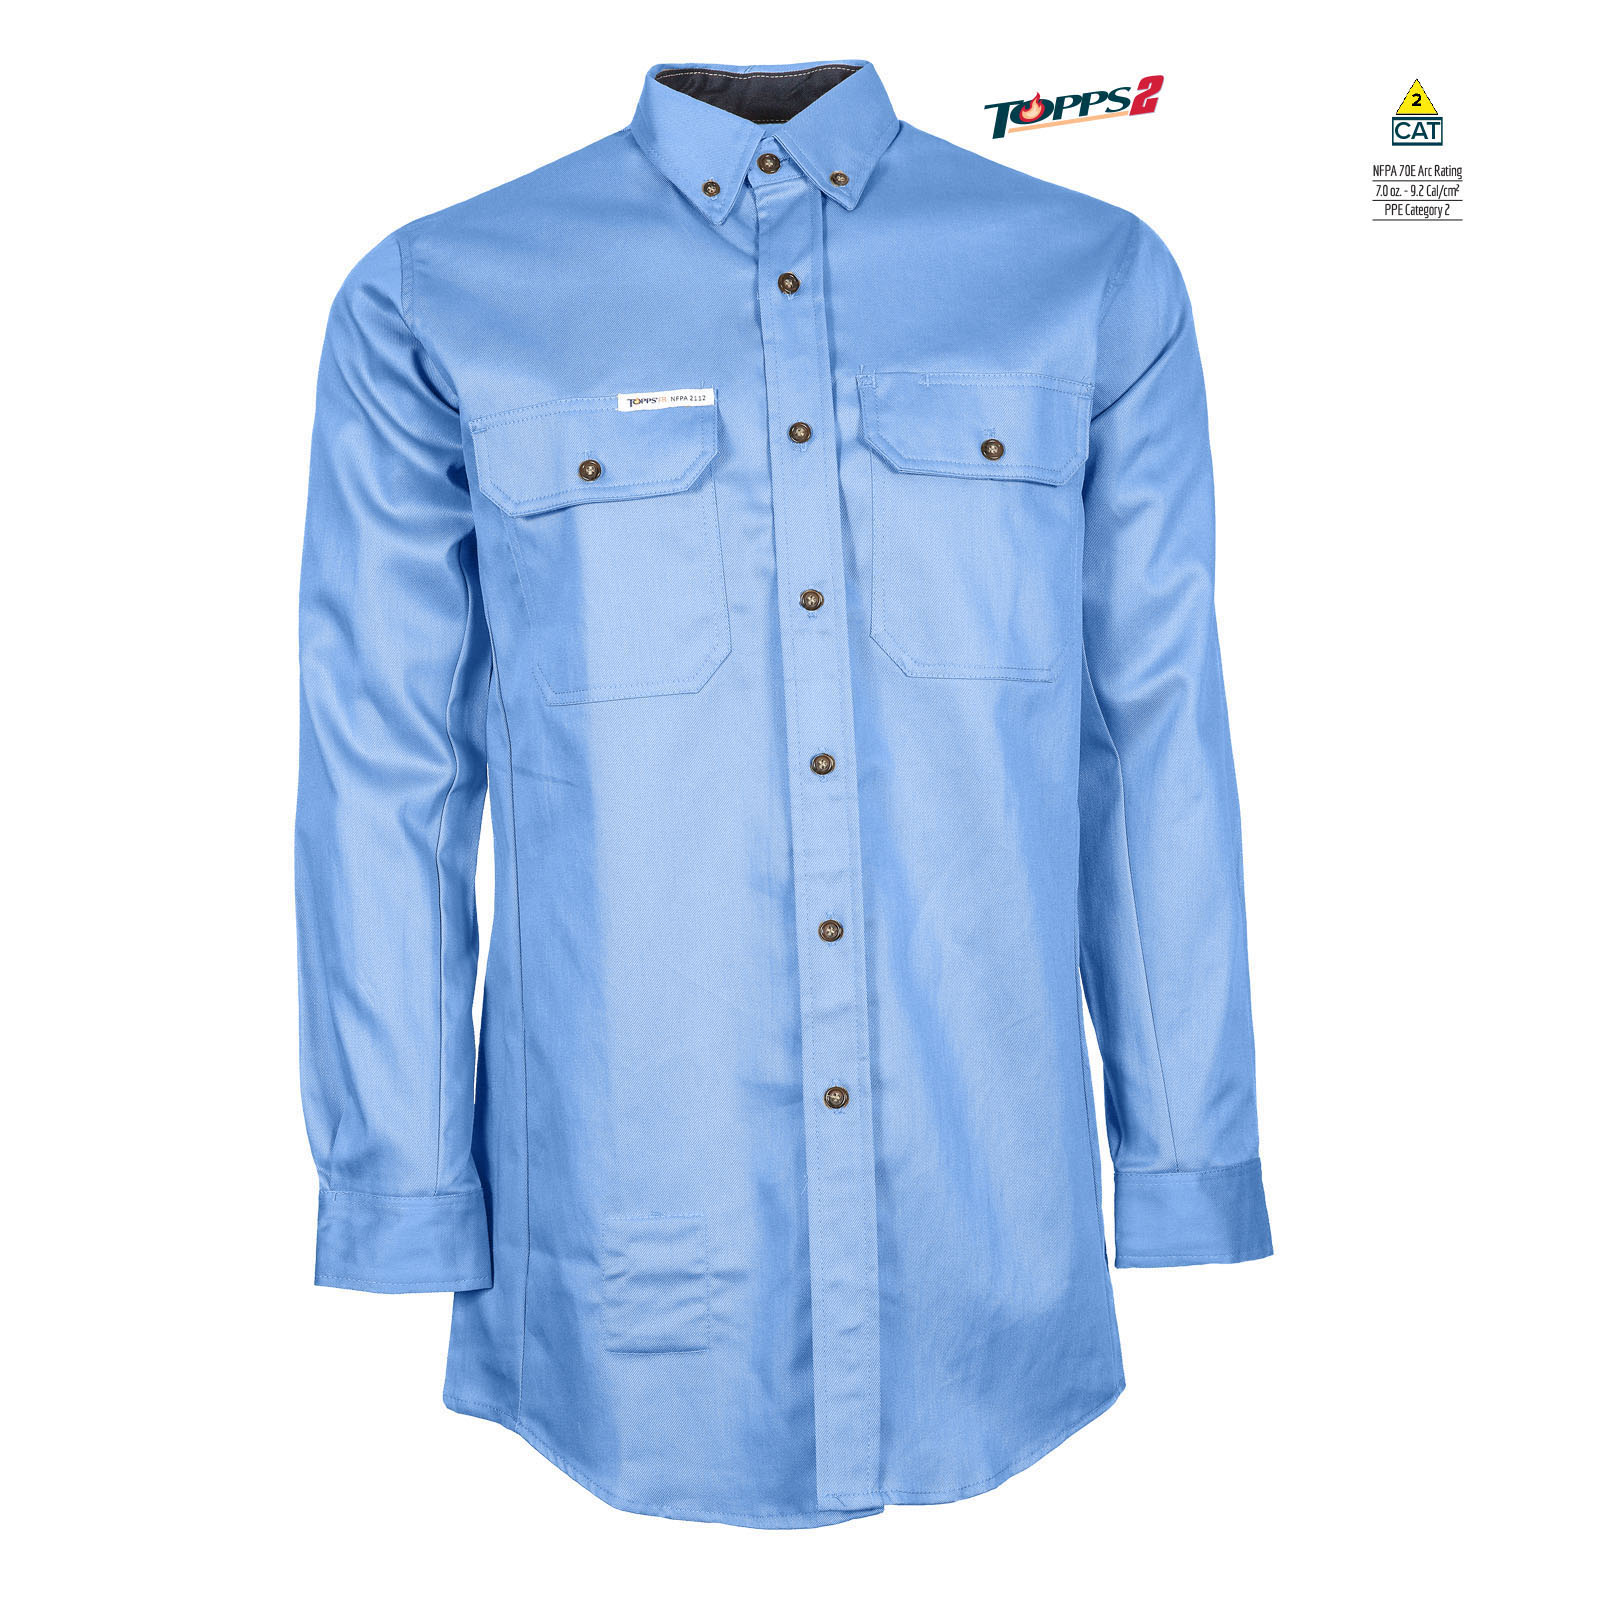 88/12 Cotton/Nylon Blend Long Sleeve FR Button-Front Shirt with Accent Colors-TOPPS